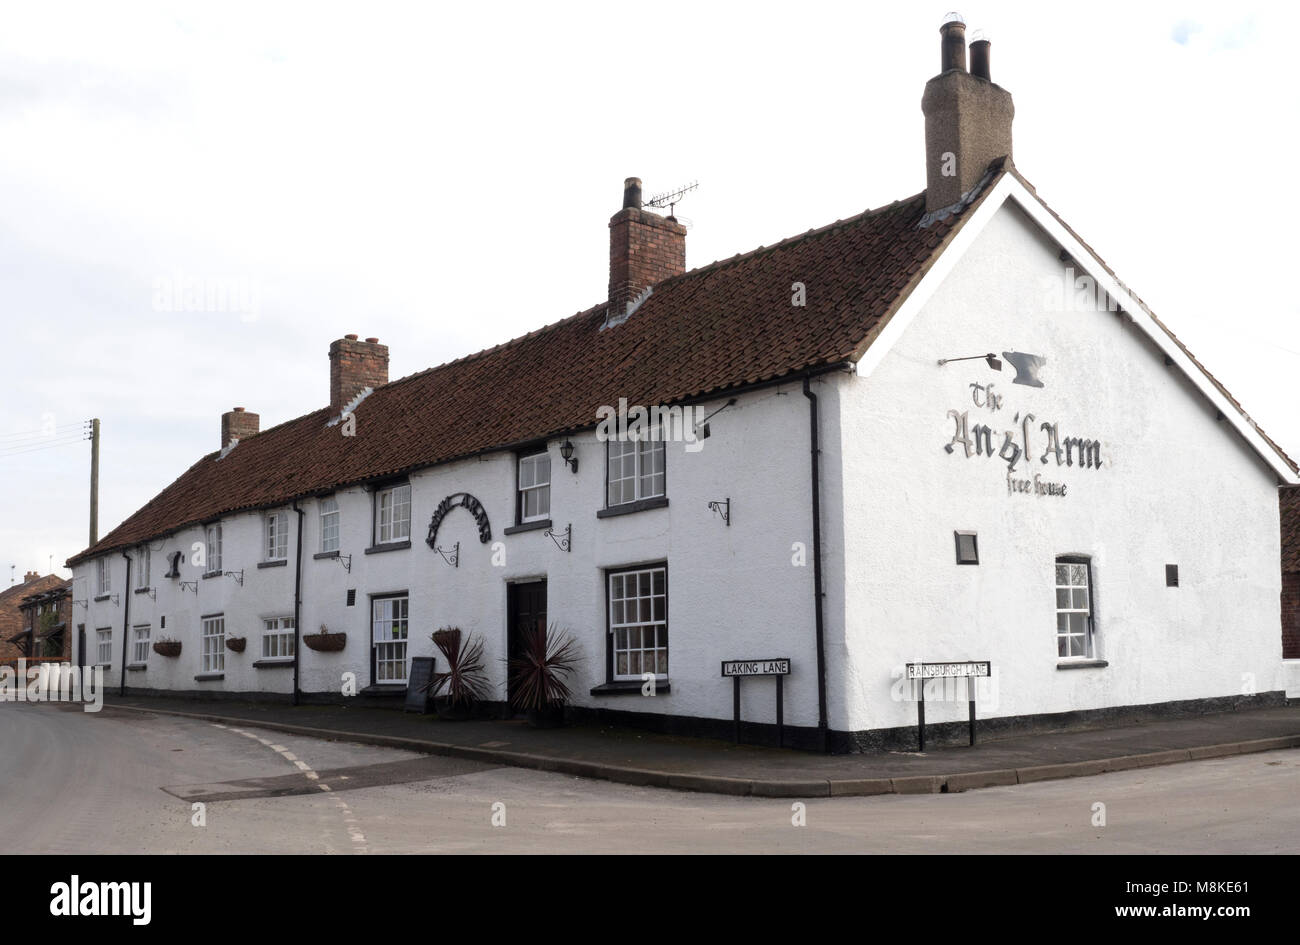 Anvil Arms Public House, Wold Newton, Driffield, Yorkshire, England, UK Stock Photo